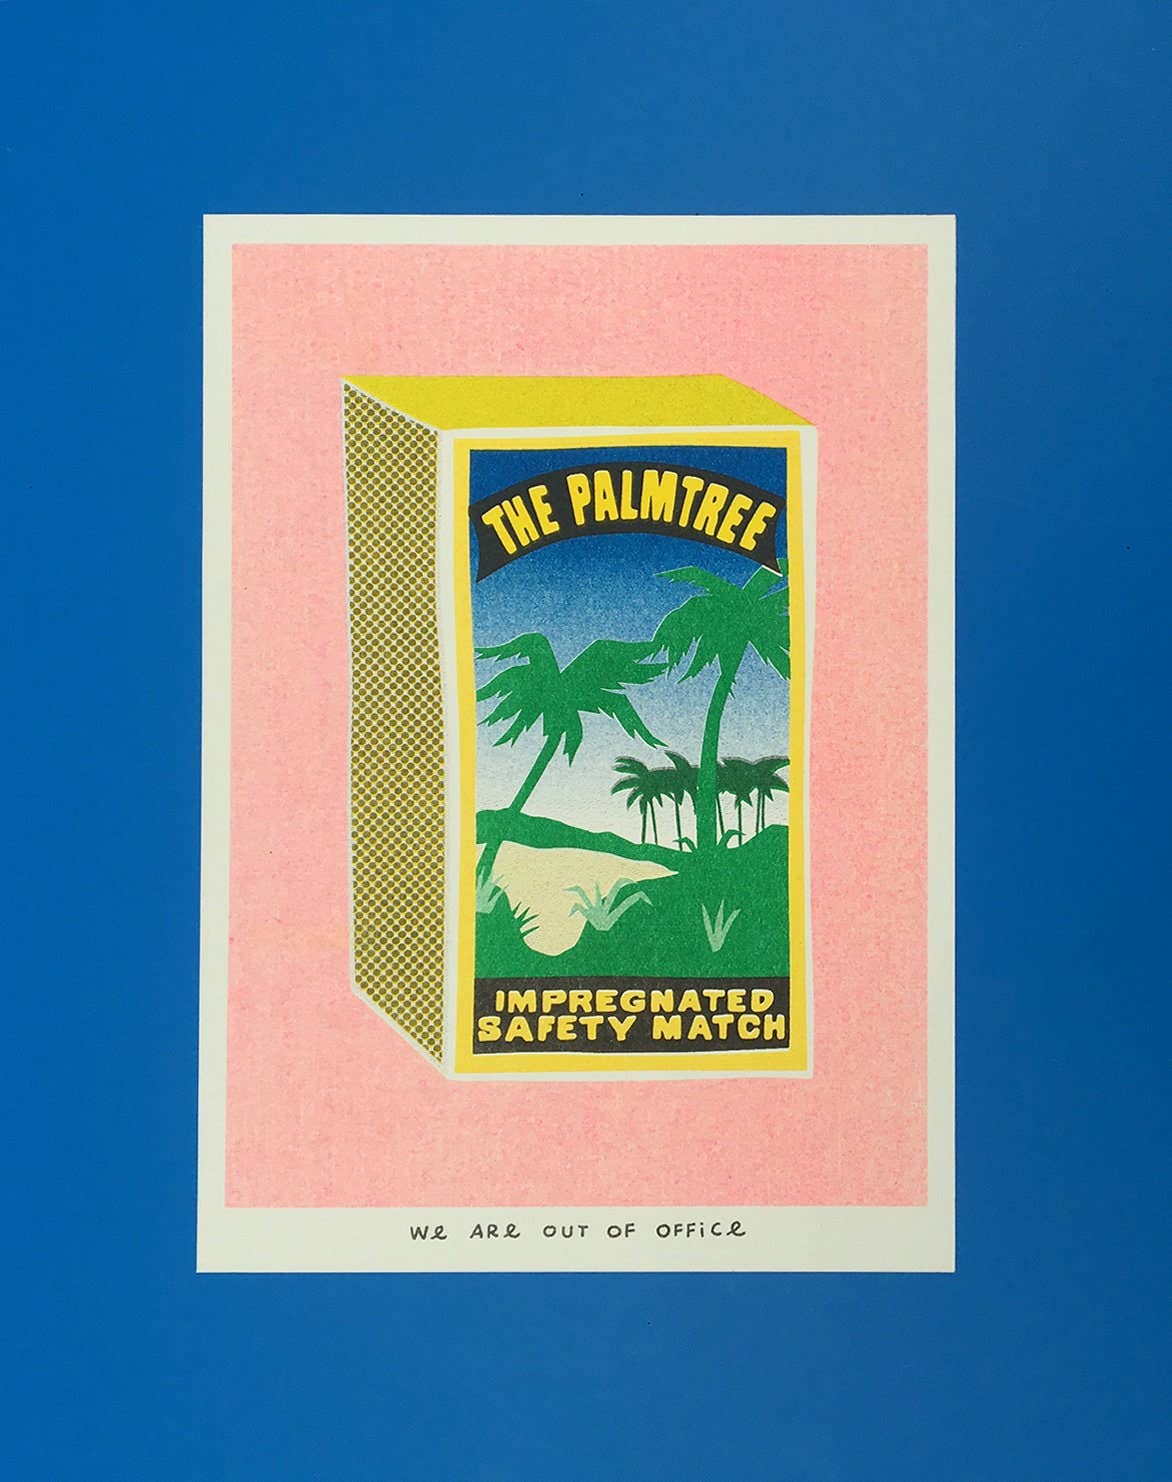 We Are Out of Office - A Risograph Print of a Palmtree Matchbox - Ensemble Studios